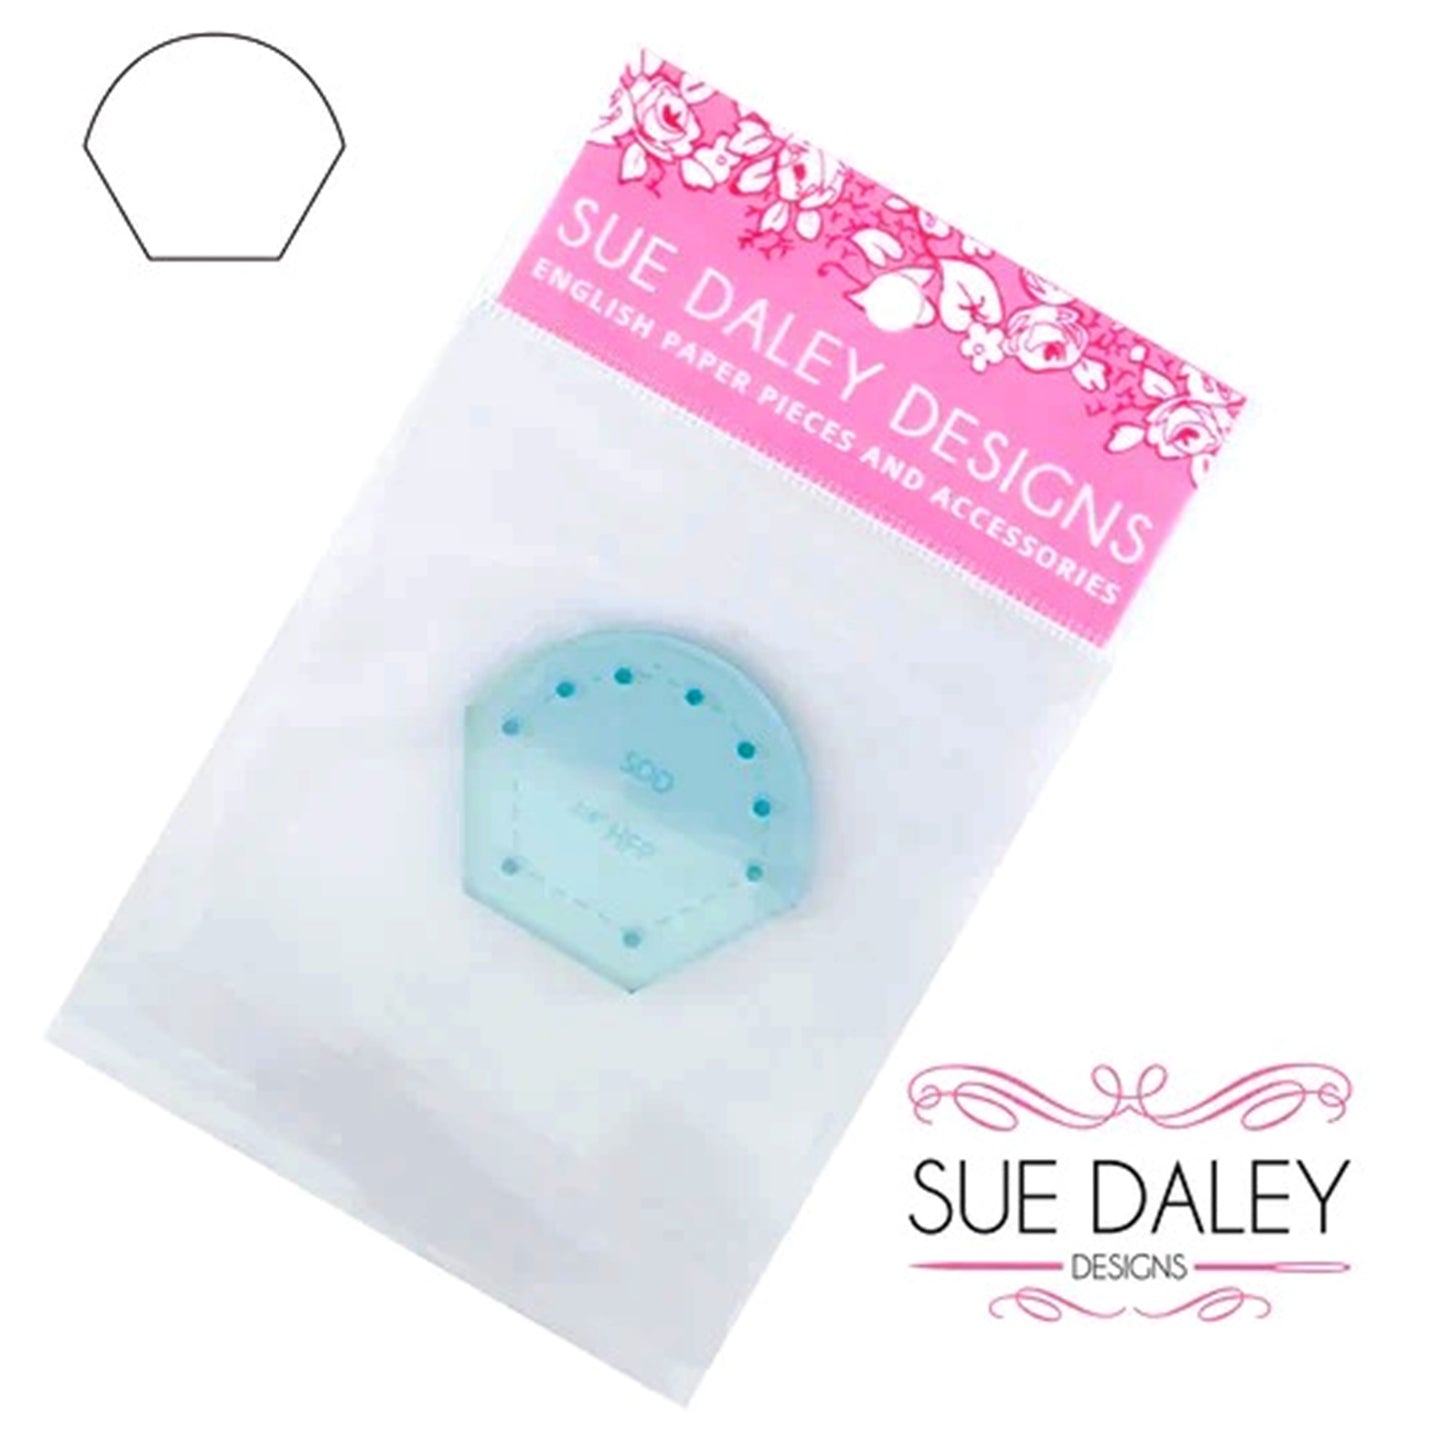 Hexagon Flower Petal papers  and templates 5/8" - 1" for English Paper Piecing EPP Sue Daley Designs